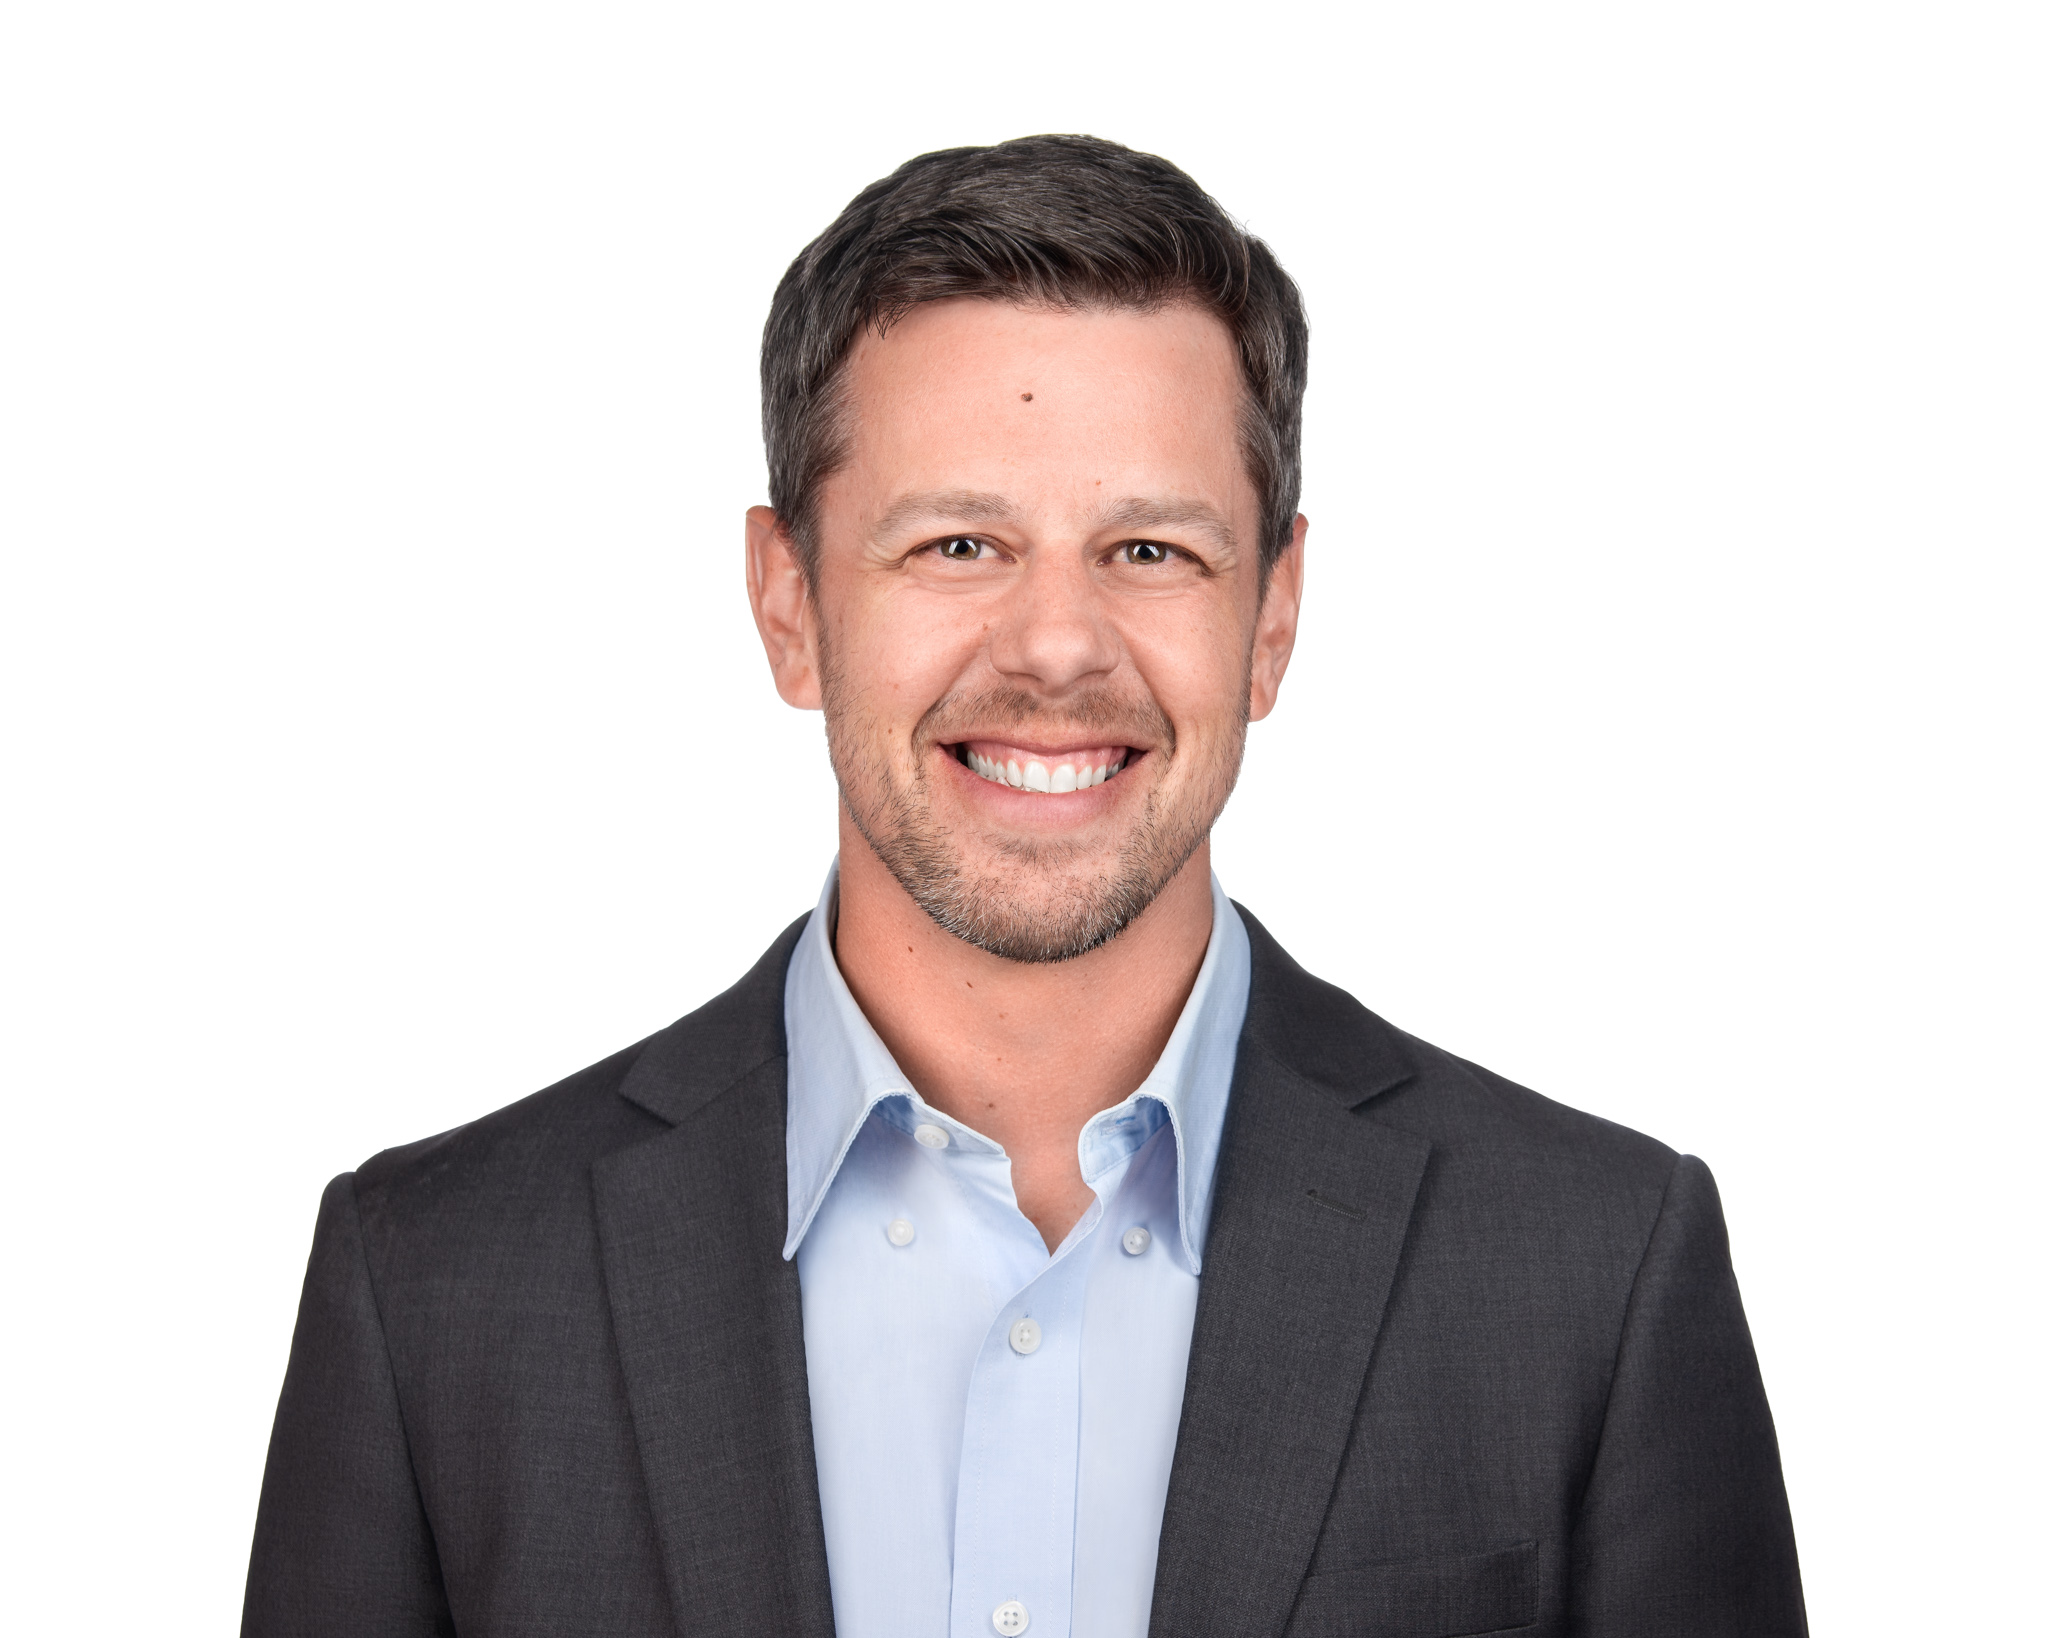 David joined Solutia Consulting in the Spring of 2022 as Resource Manager. There, he applies his robust recruiting background and expansive network to identify and secure top-notch employees and independent consultants. His dedication to building strong connections between hiring managers and candidates is a hallmark of his success. 